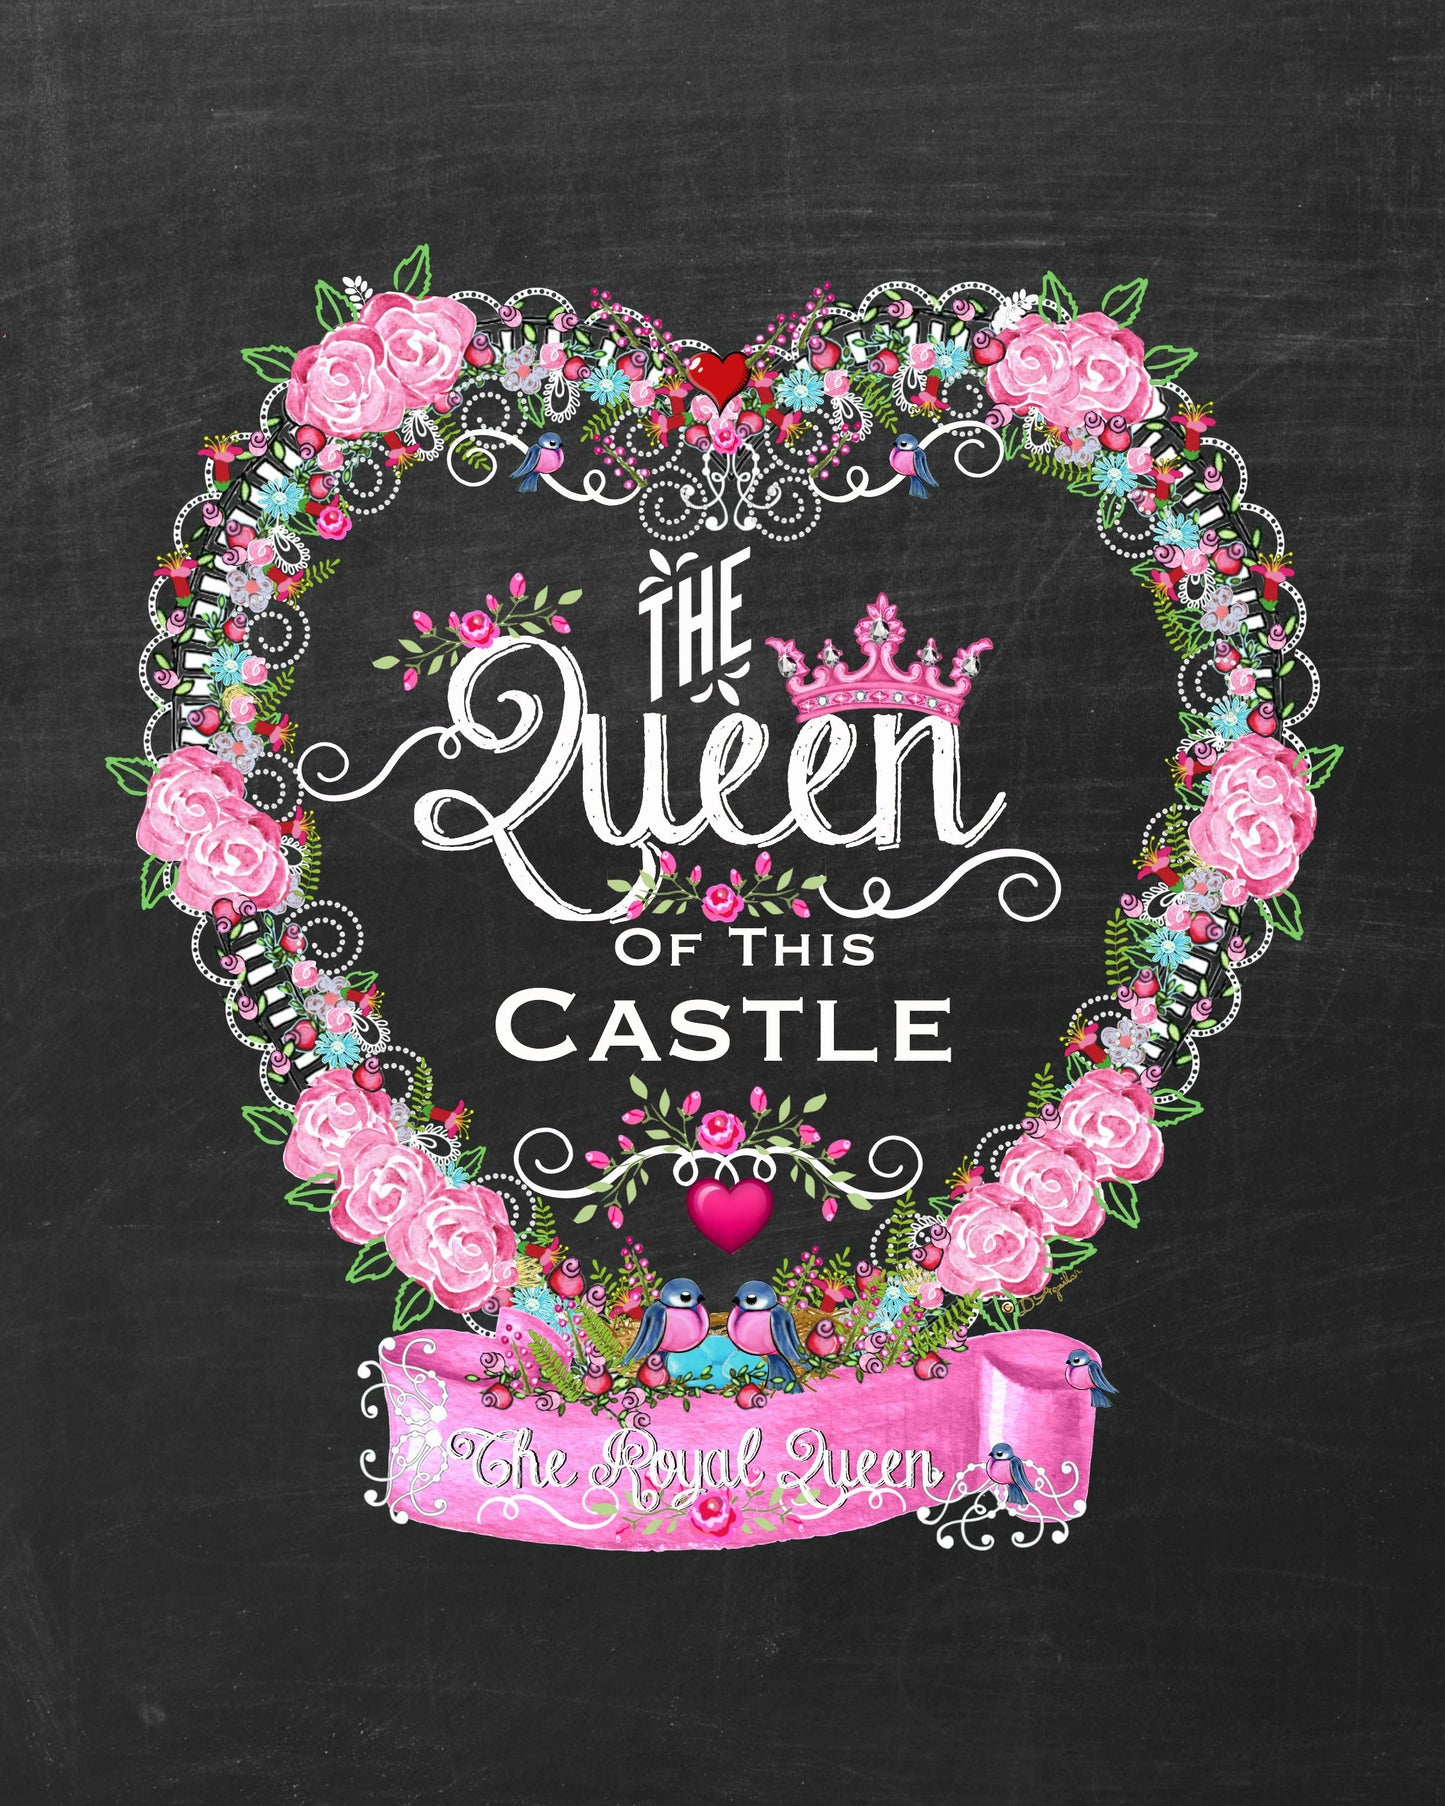 The Queen of this Castle Heart 8x10 Print Ready to Frame is part of a collection of matching prints